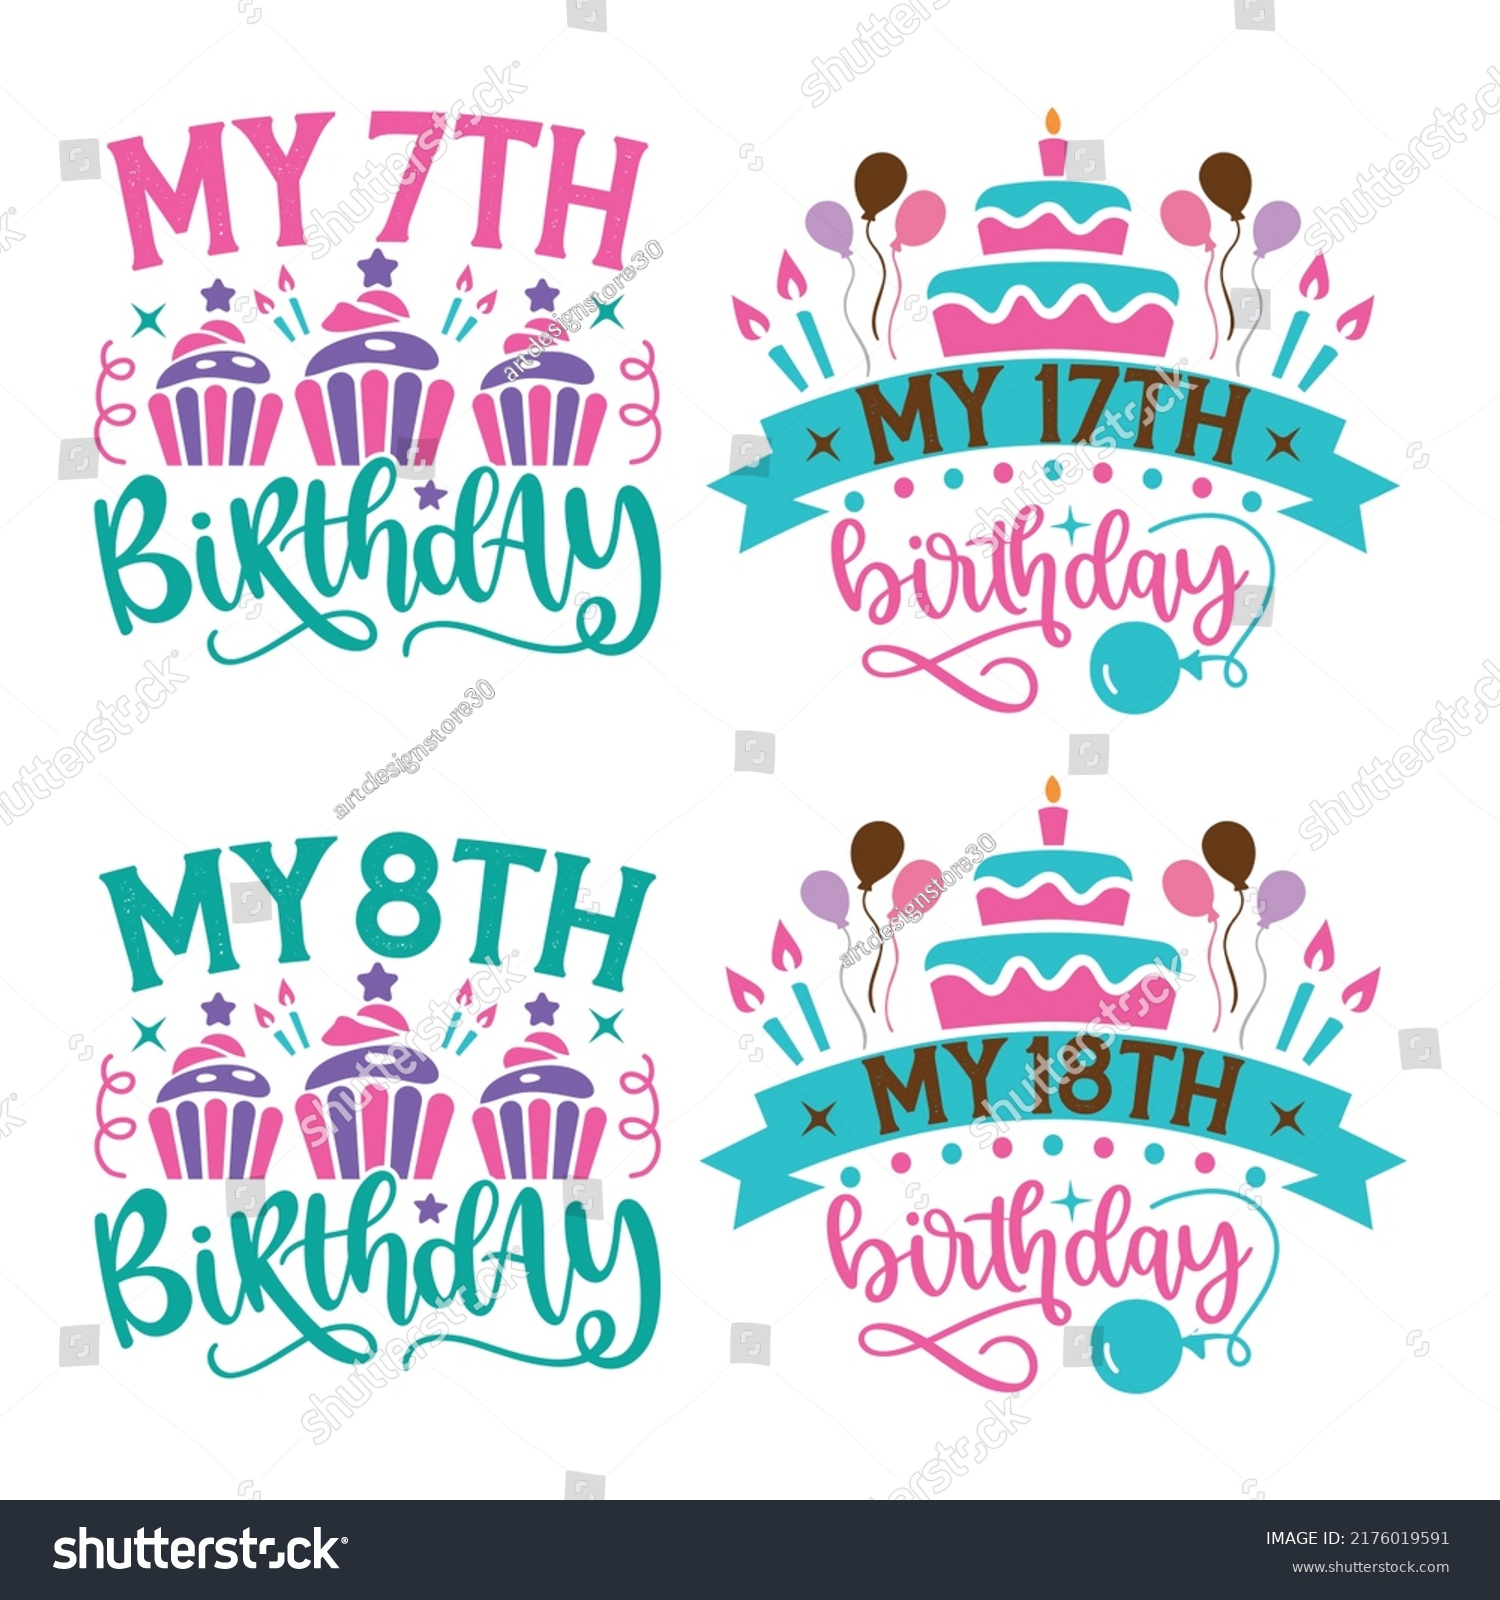 SVG of Happy Birthday T-shirt And SVG Design Bundle, Happy Birthday card design elements. Birthday party design for Vector graphic design. Vector EPS Editable File Bundle, can you download this bundle. svg